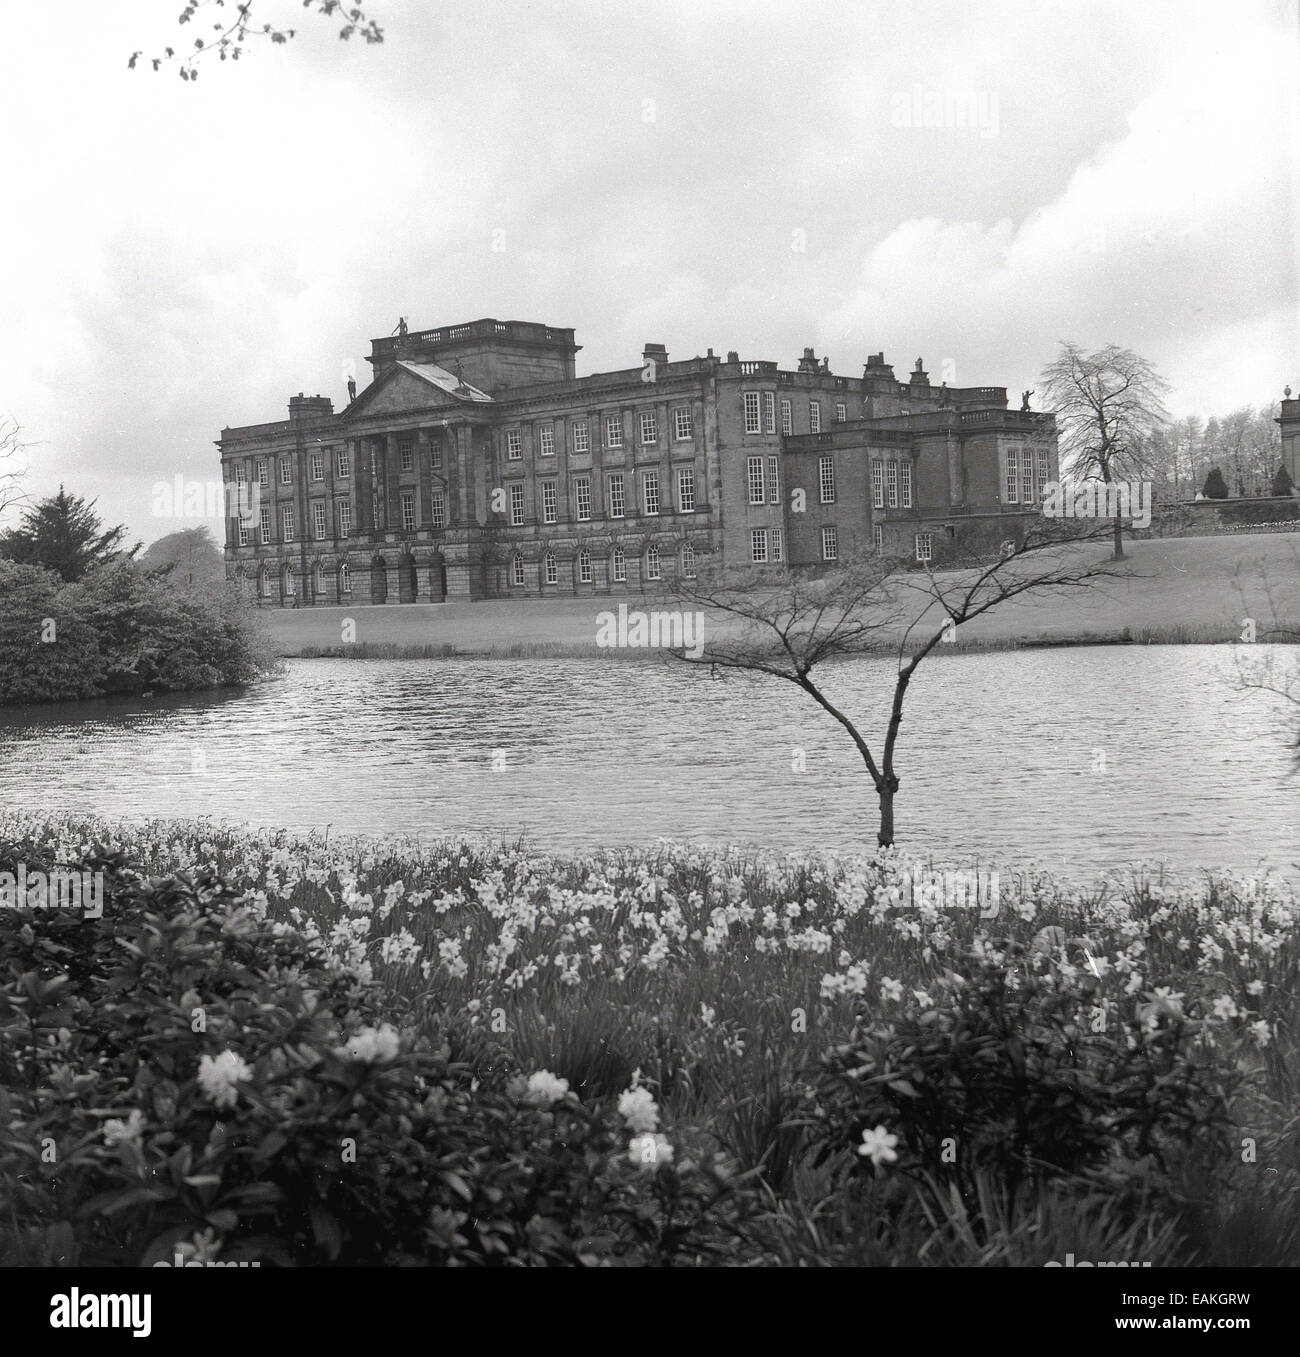 1950s, historical view of the South front of Lyme House, Disley, Cheshire, England, showing lawn and lake. Stock Photo